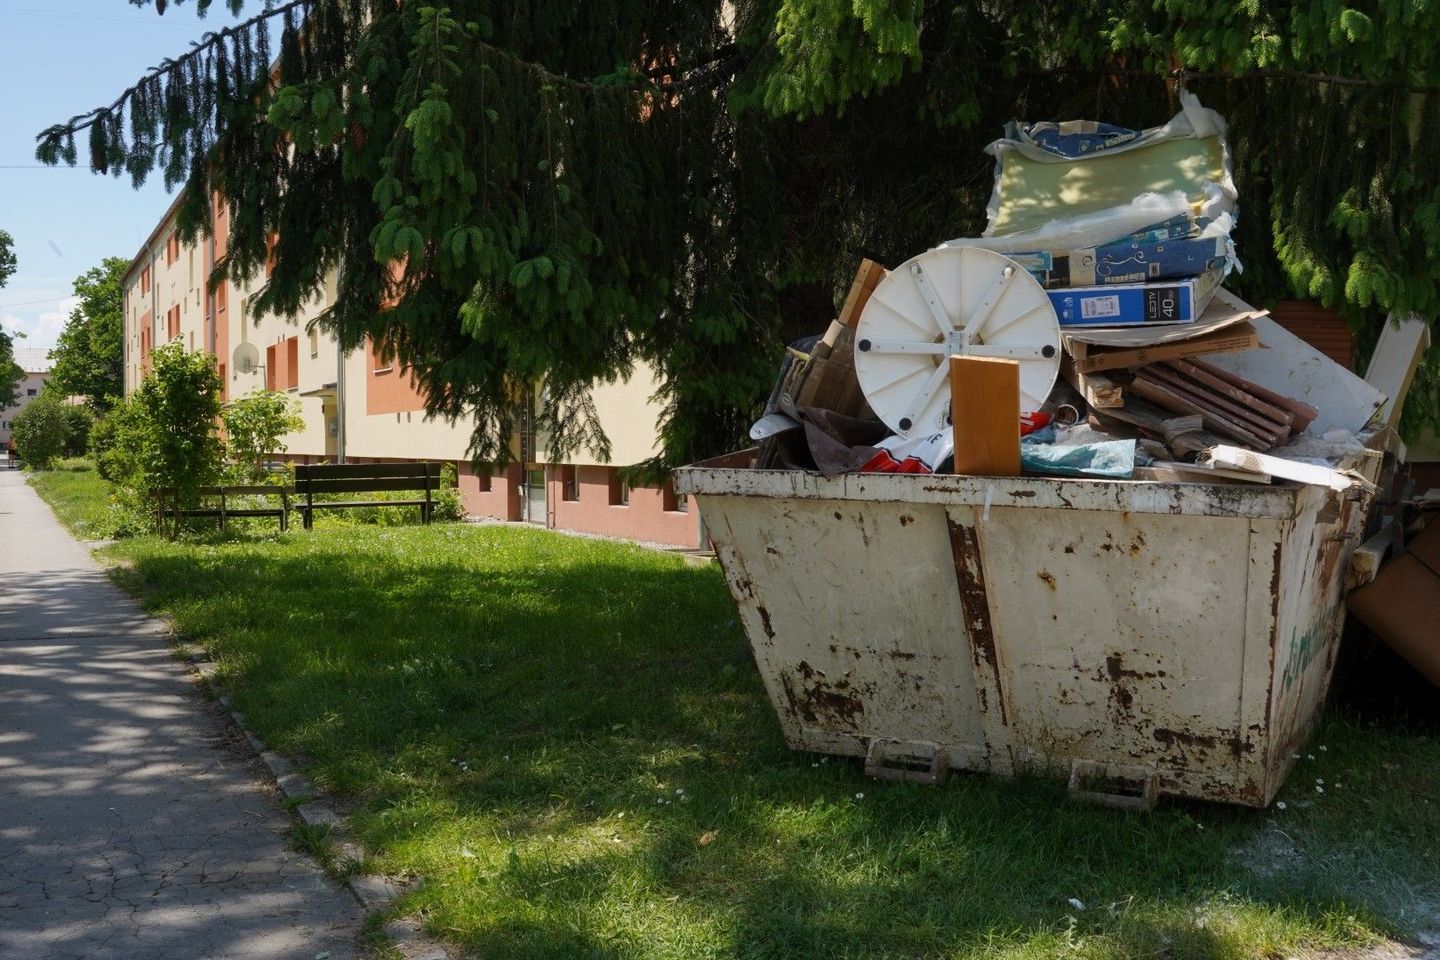 Home Junk Removal Services in Okotoks, AB